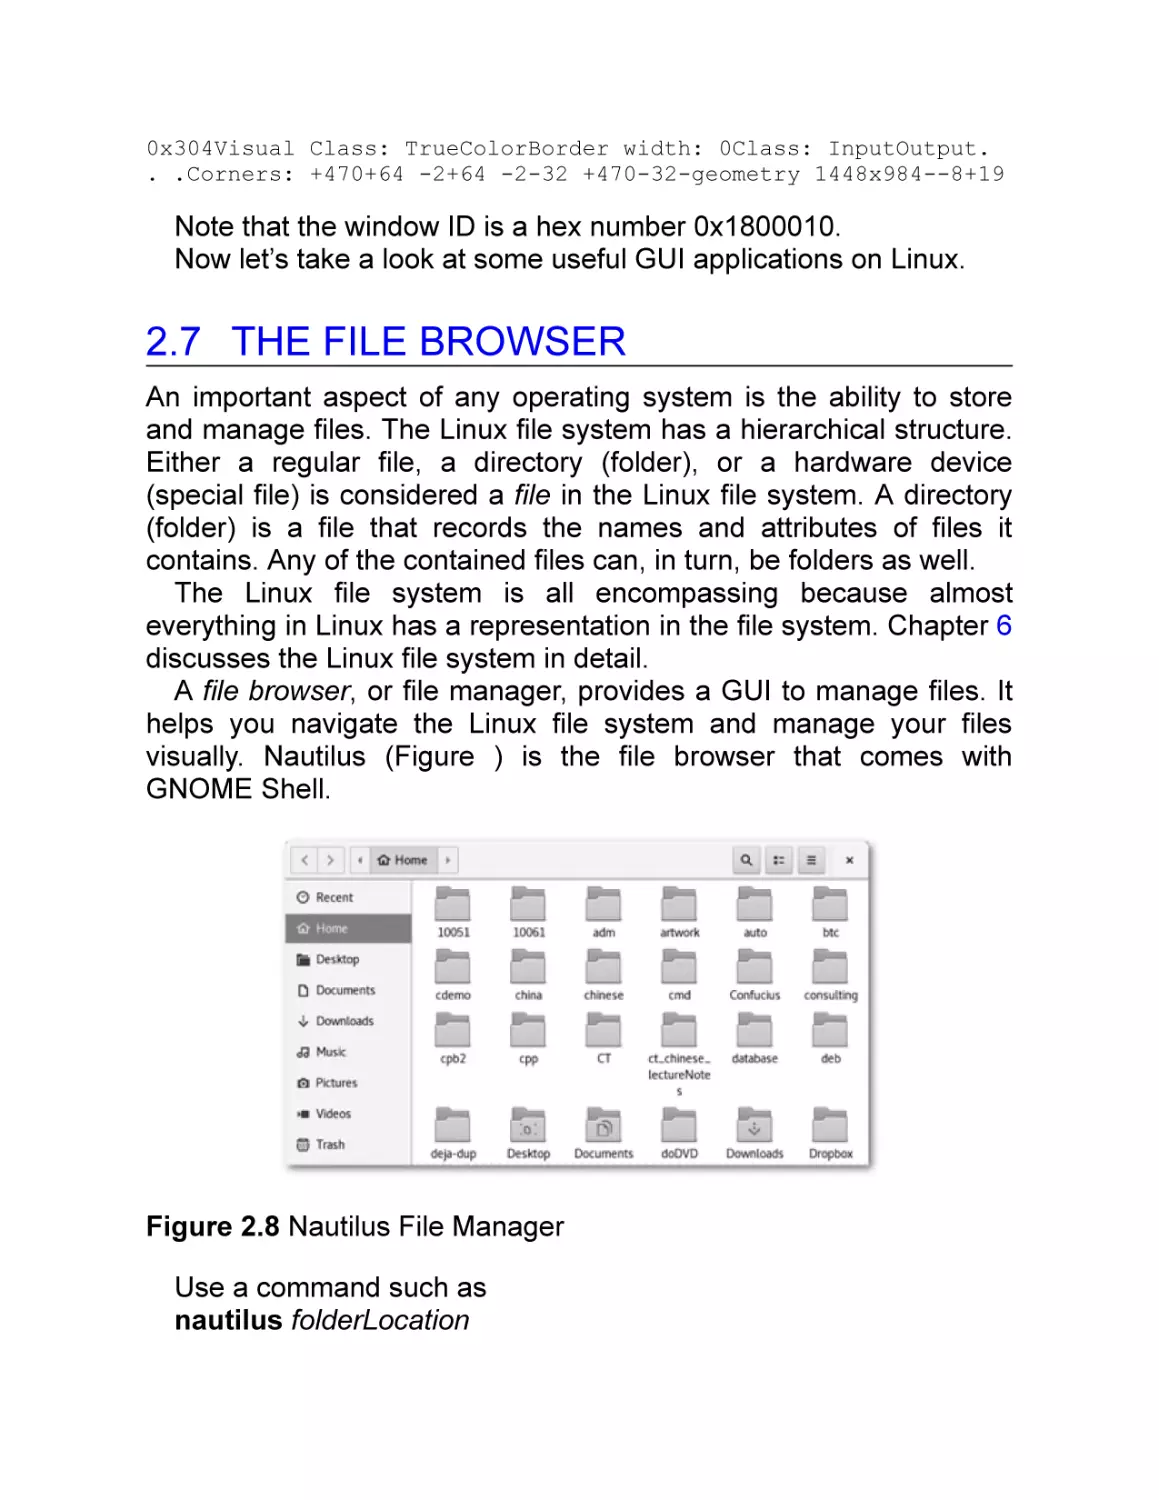 2.7 The File Browser